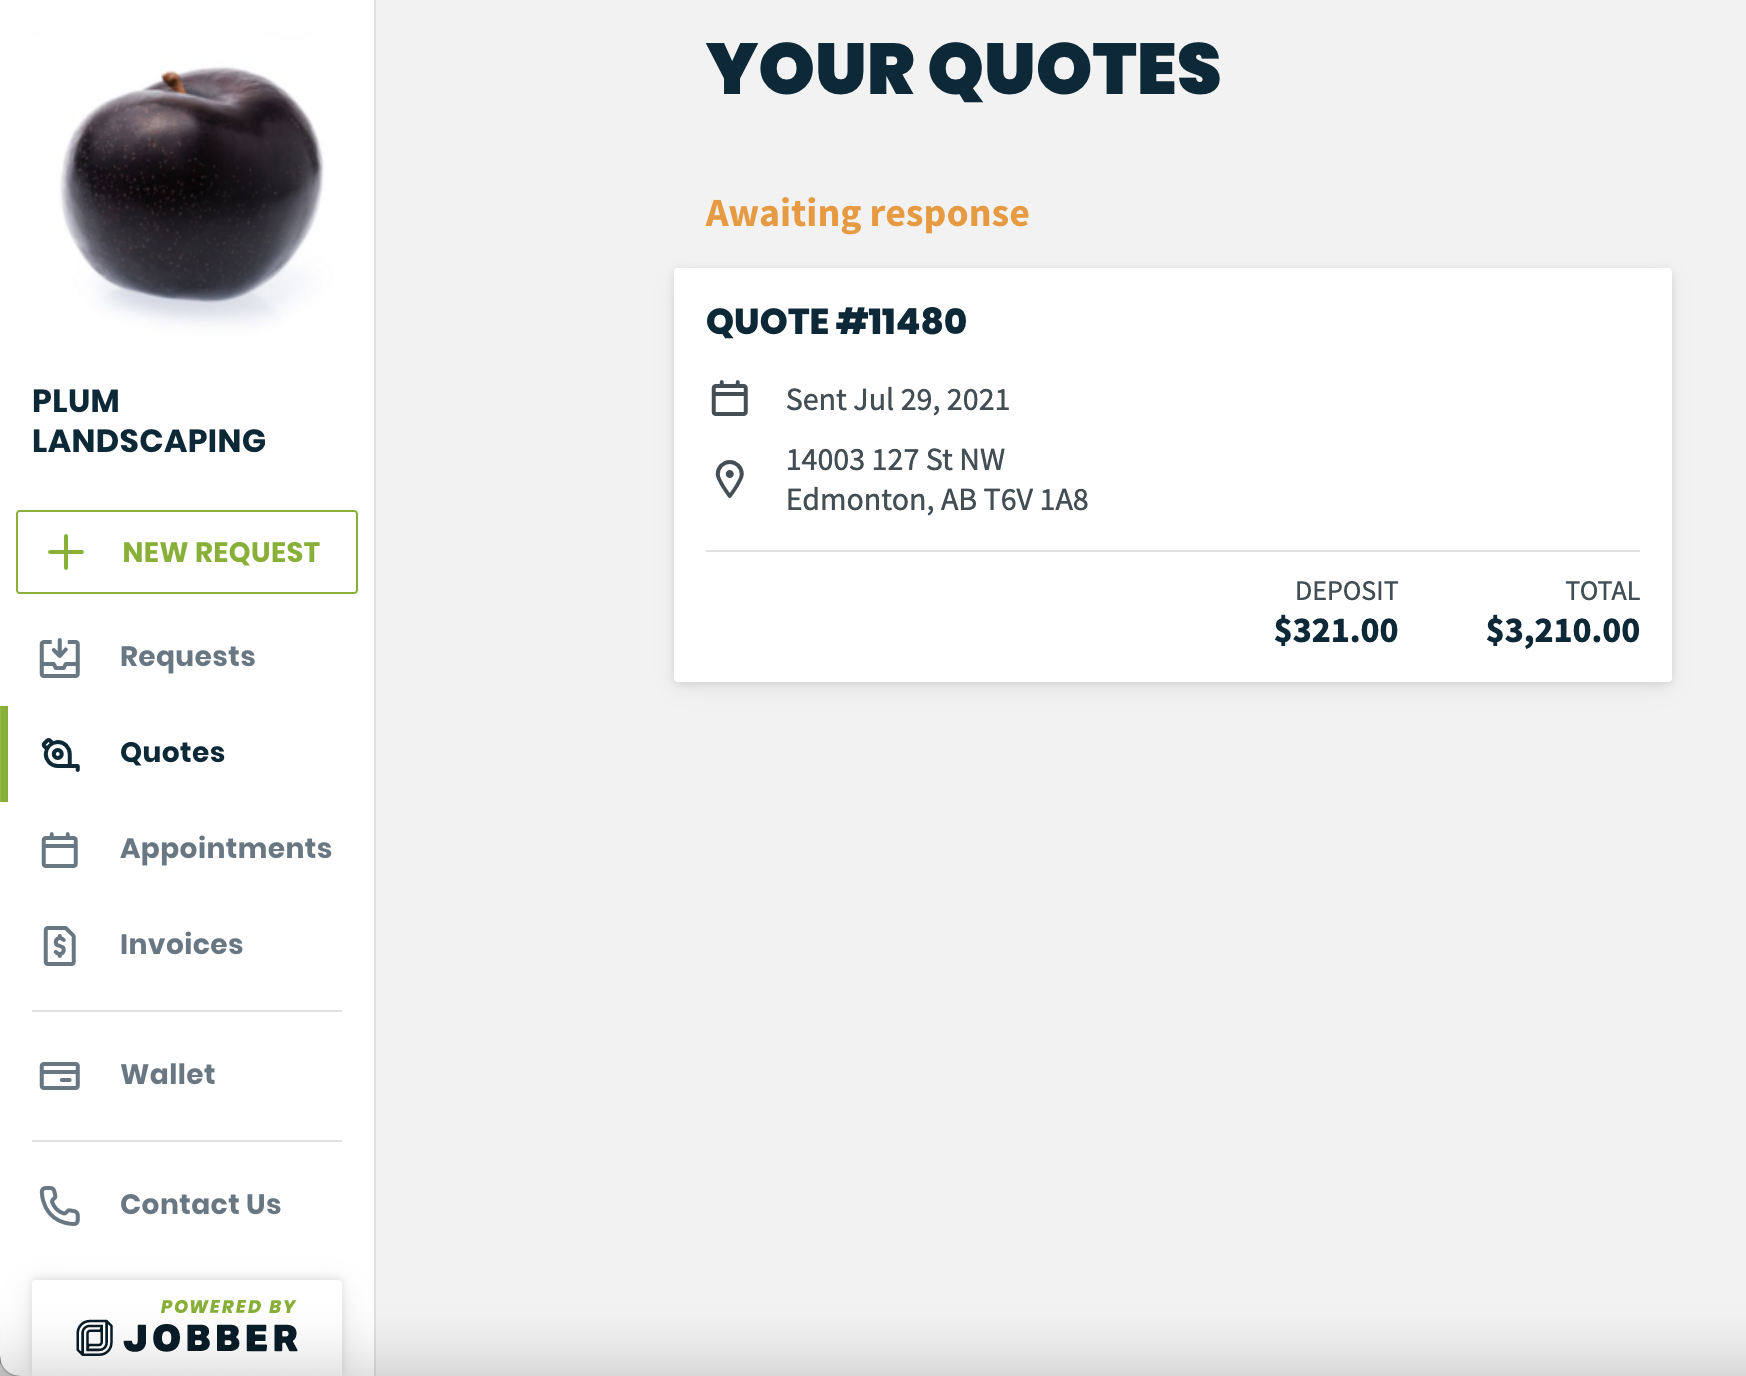 quotes tab in client hub showing a quote that is awaiting response from the client.